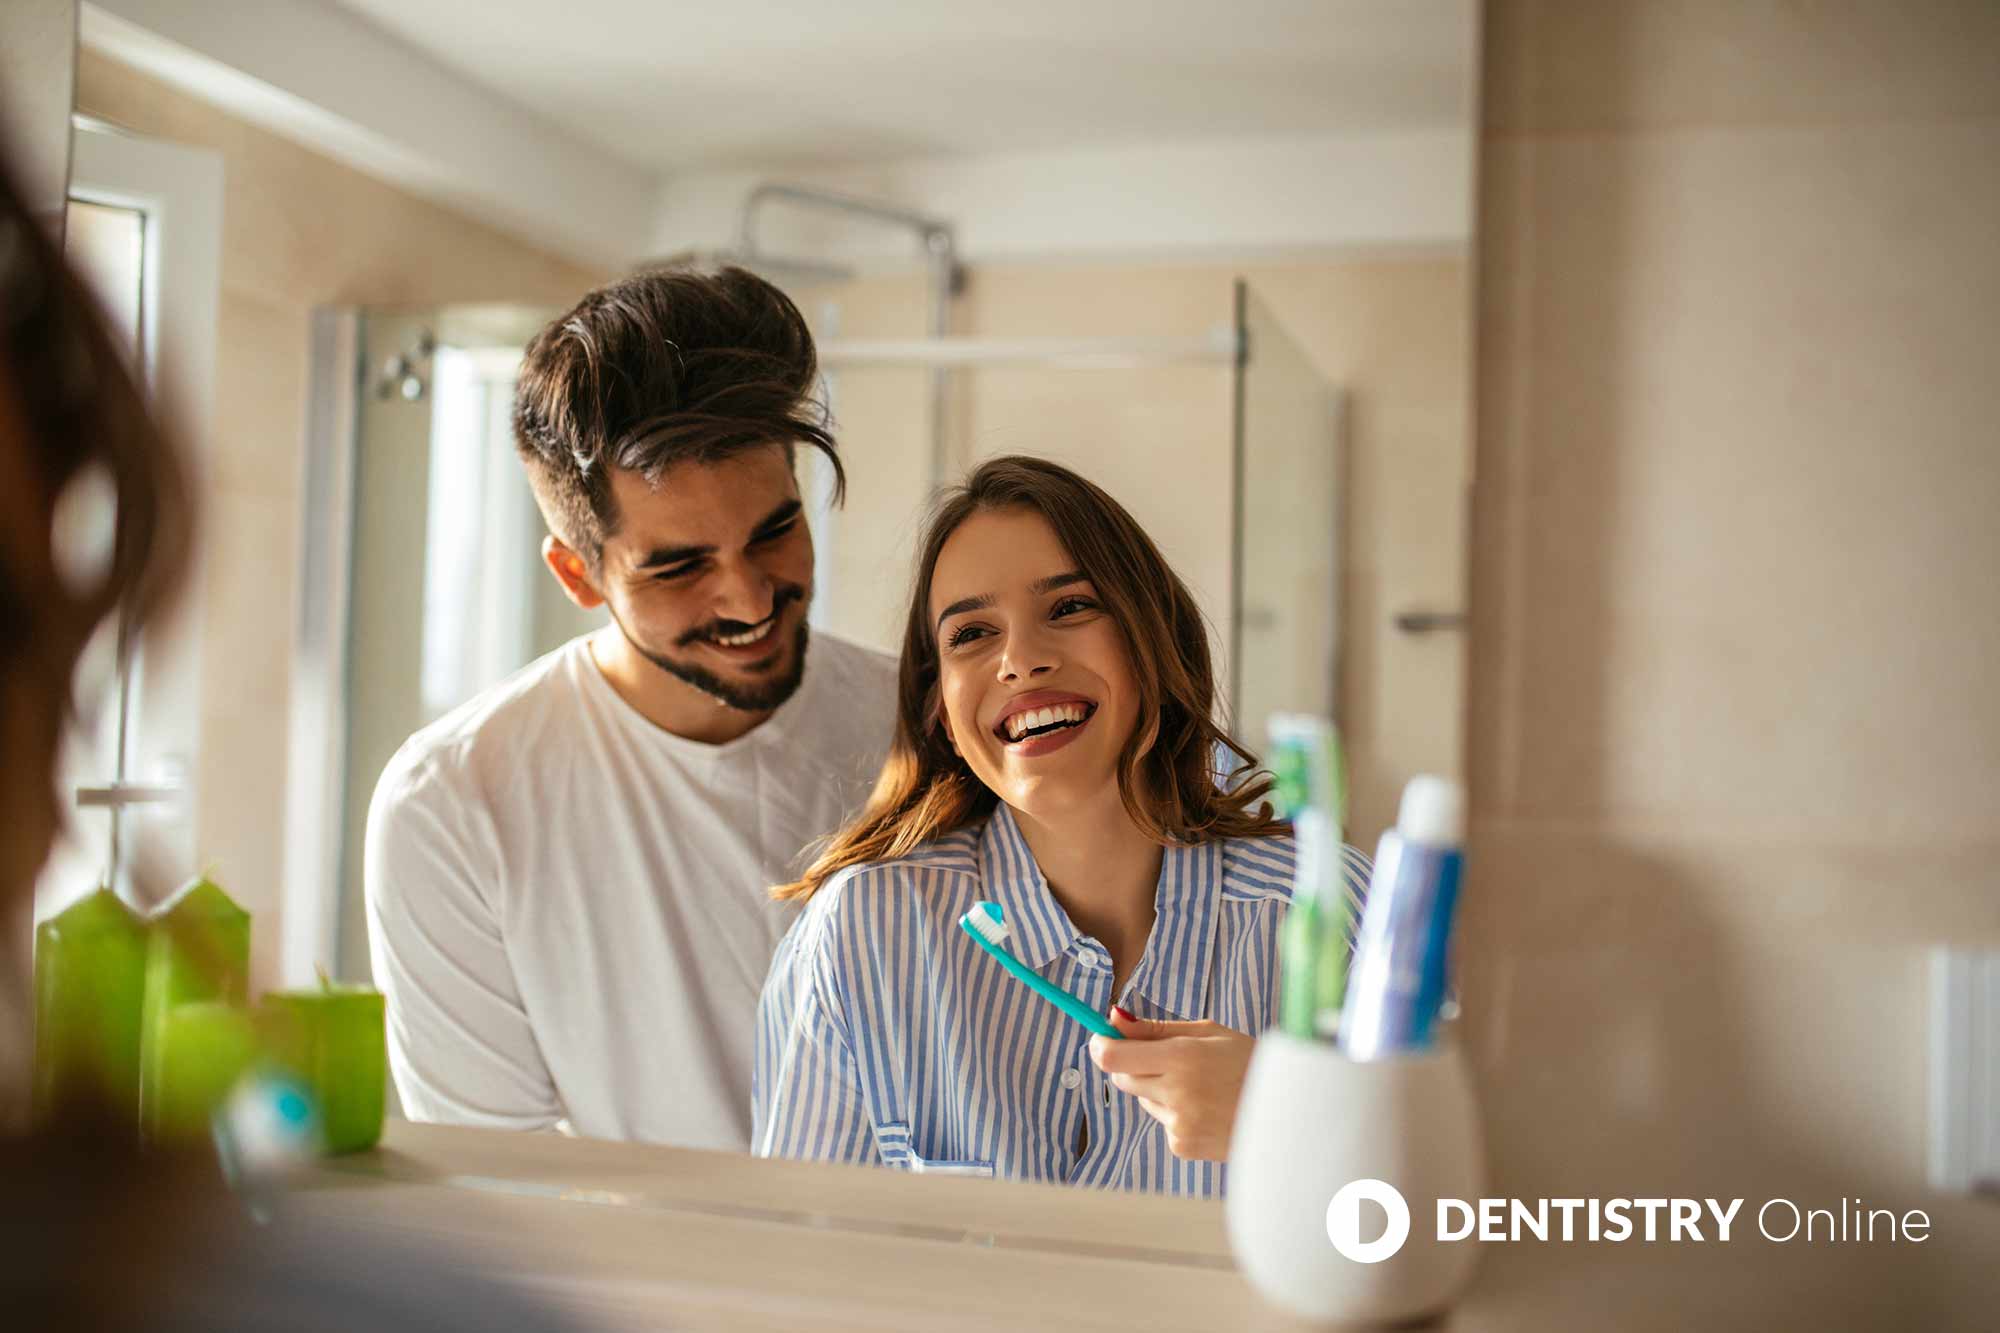 Sharing the same toothbrush and toothpaste can significantly increase the spread of COVID-19 transmission, according to latest research